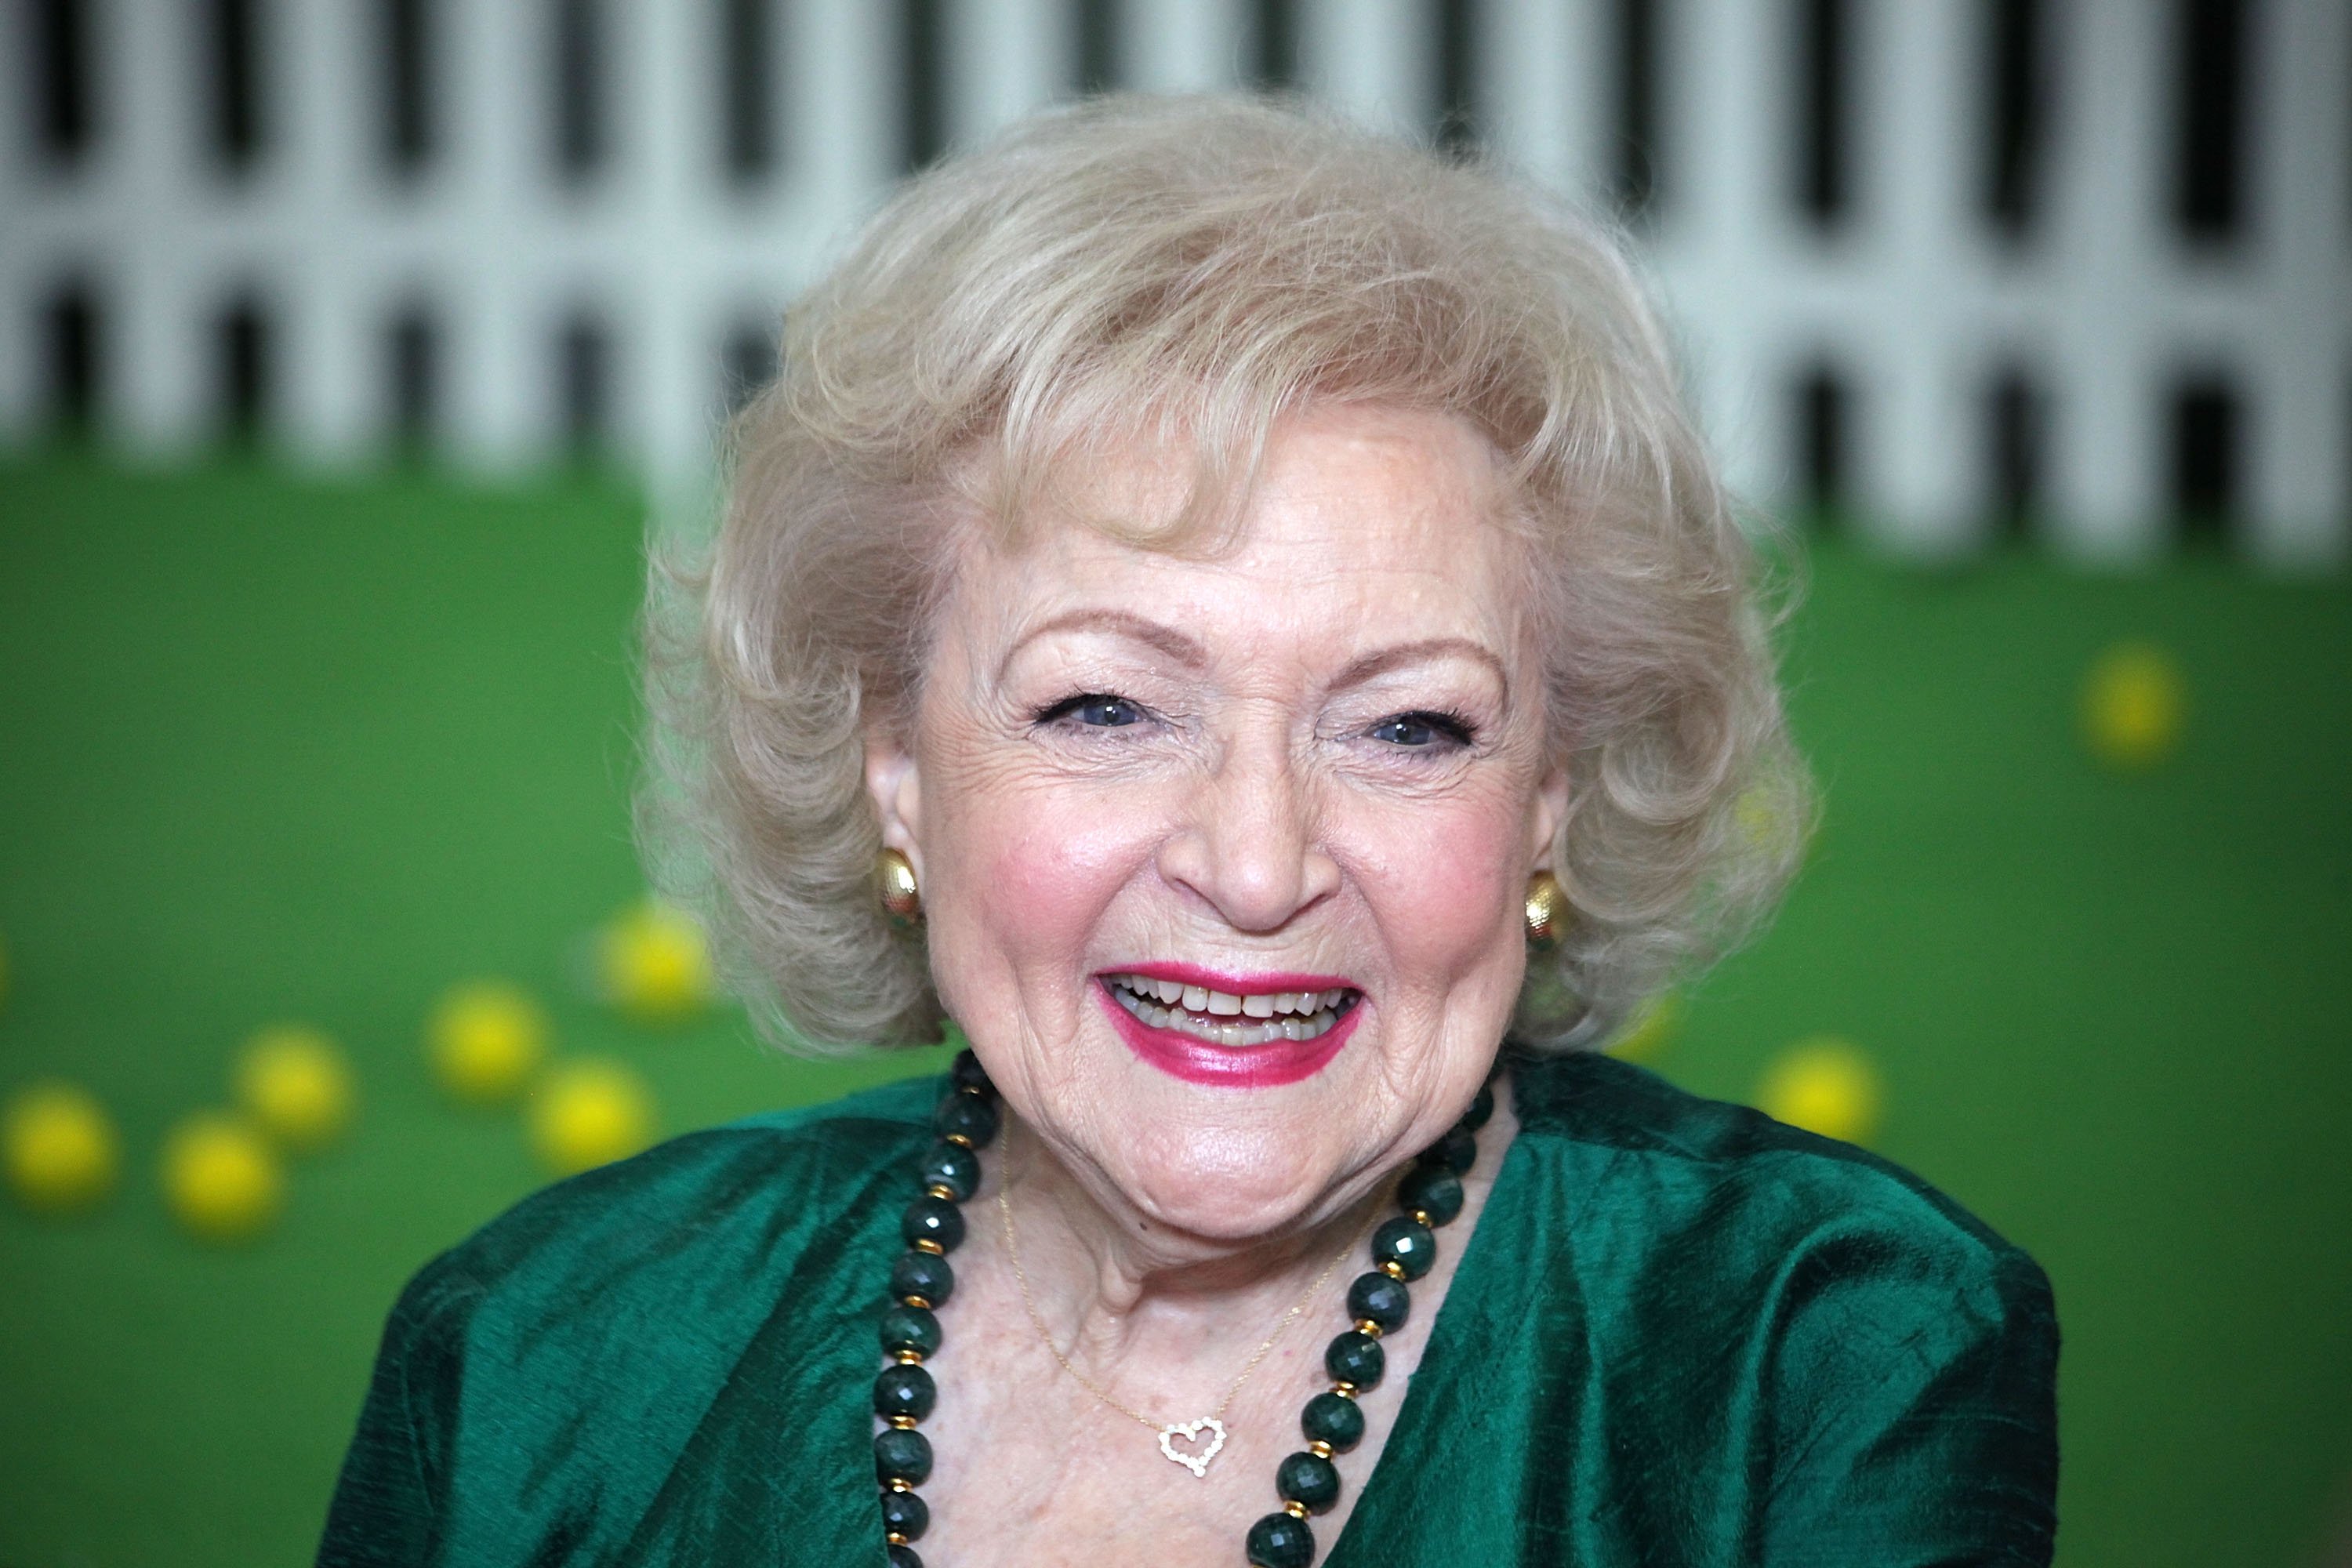 Betty White smiles while wearing a green dress and matching green earrings.